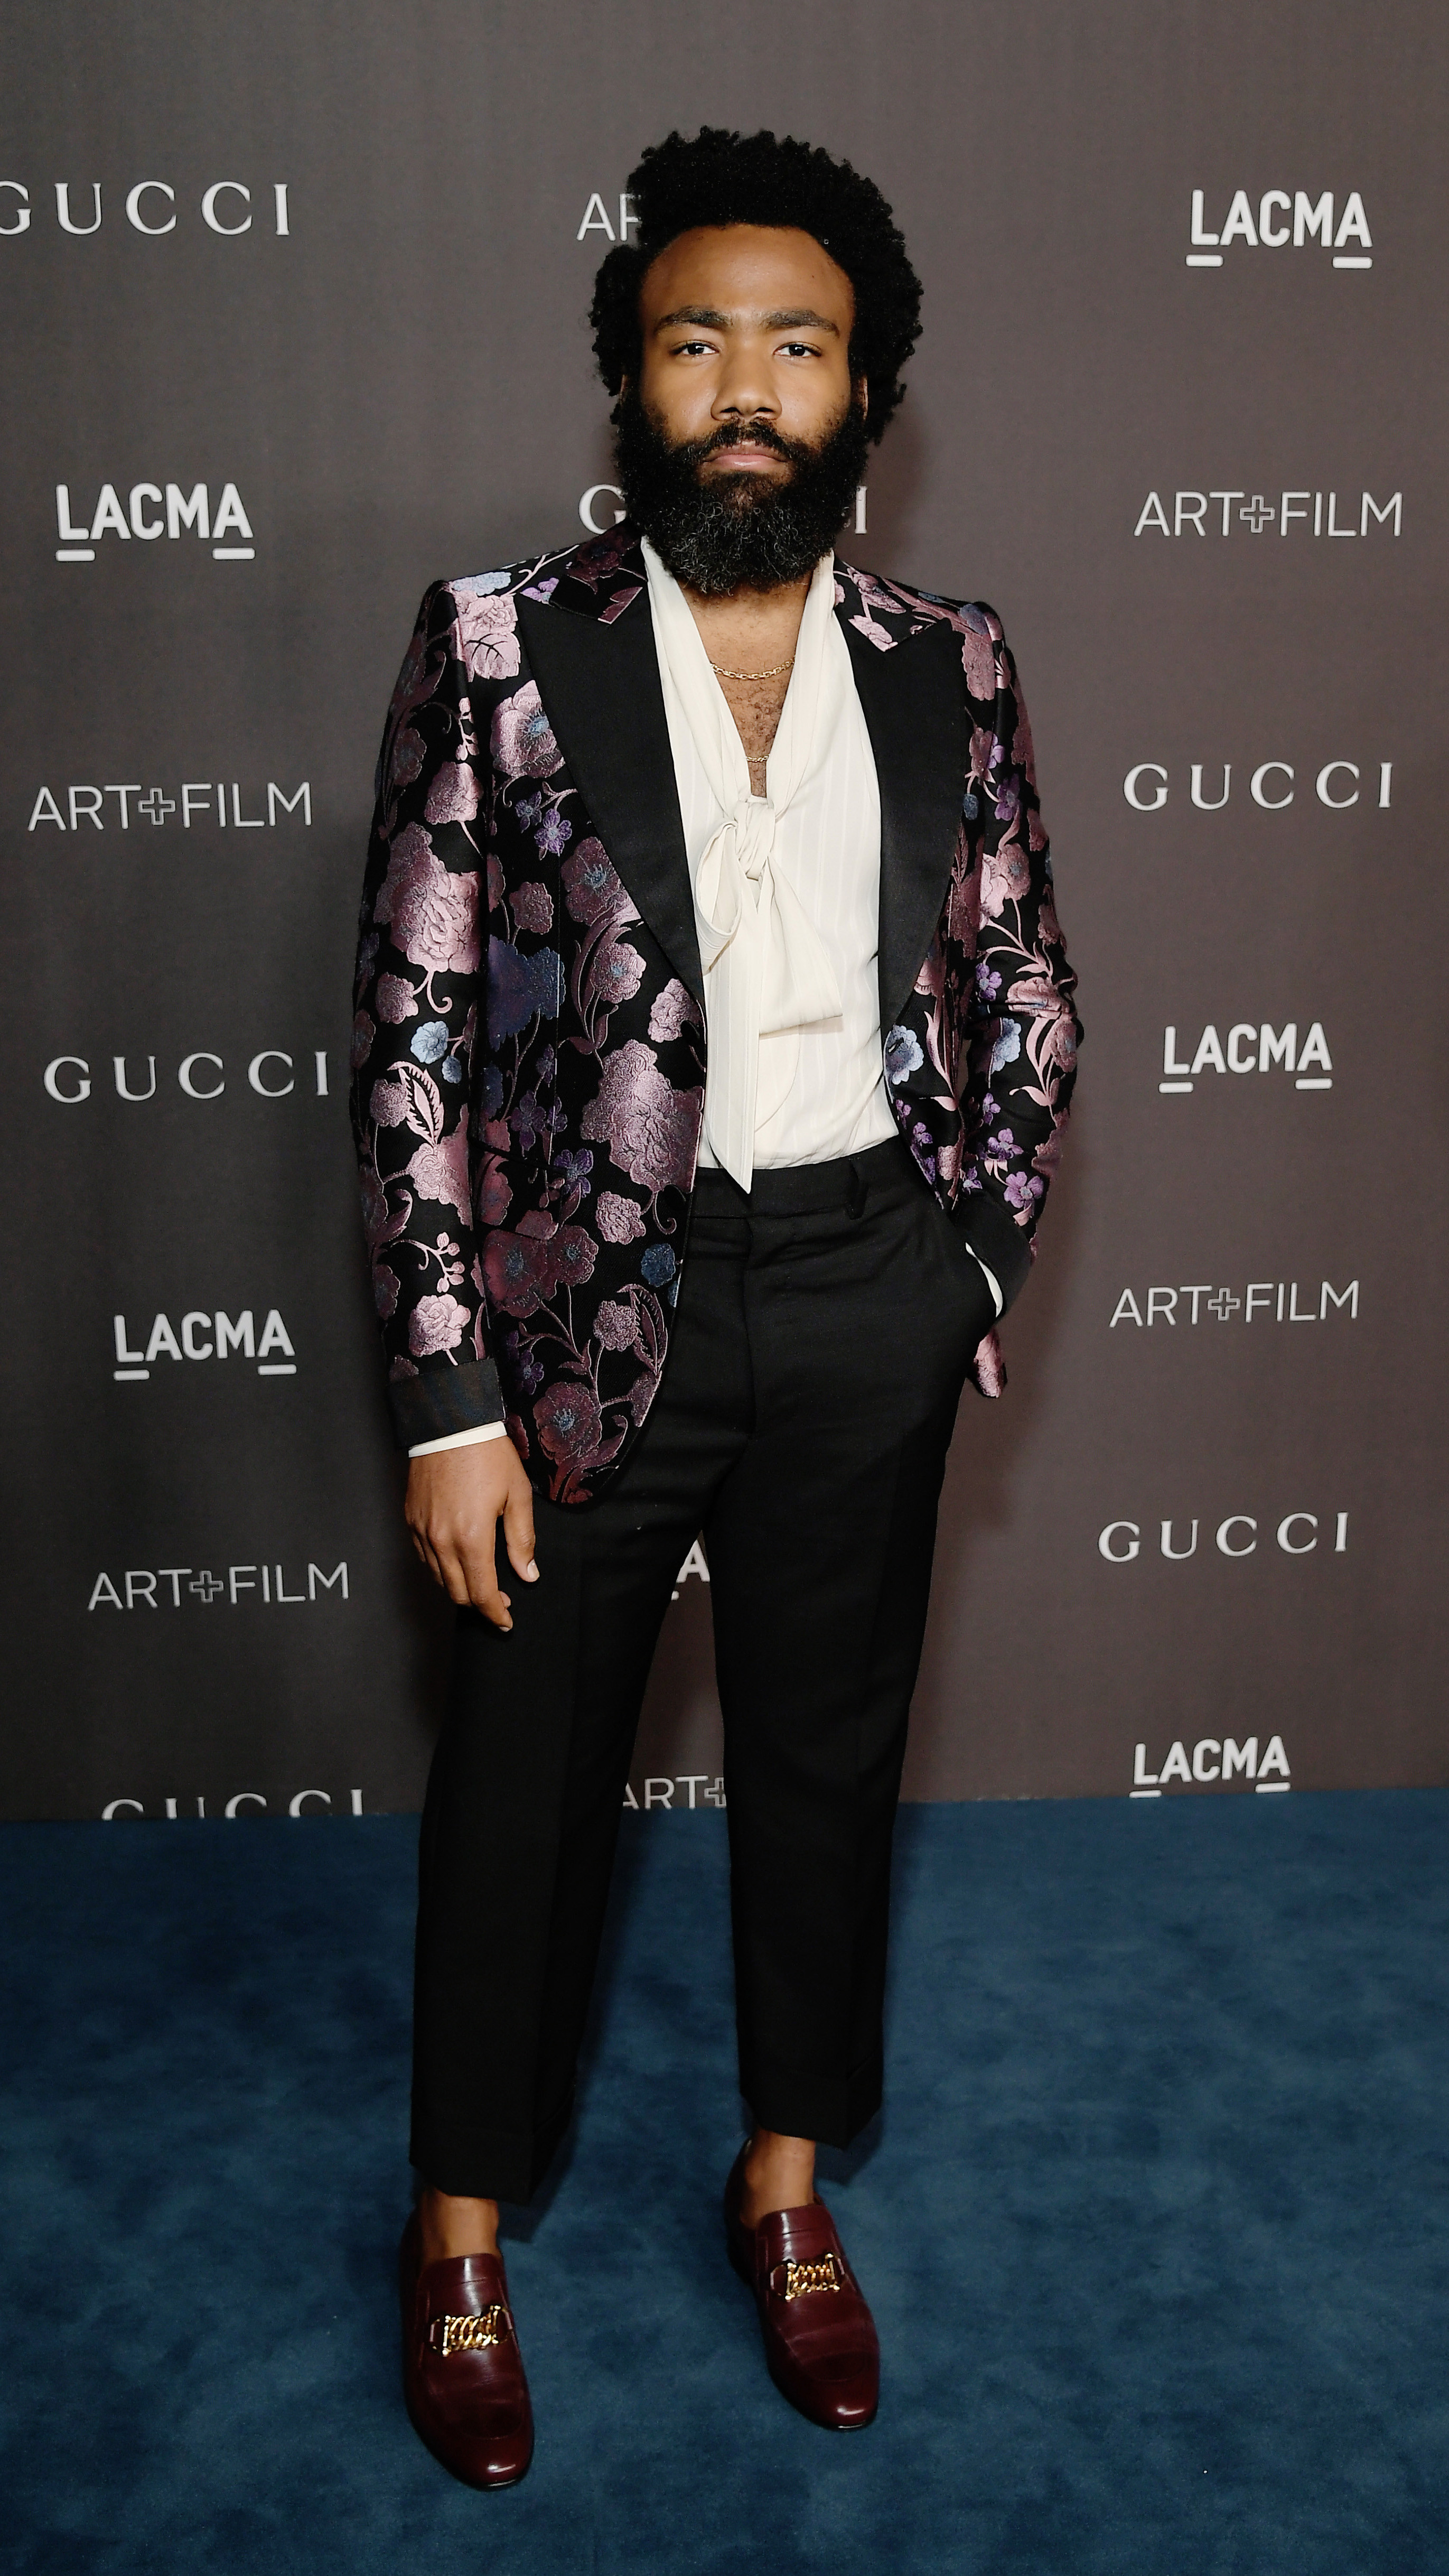 Donald Glover on the red carpet